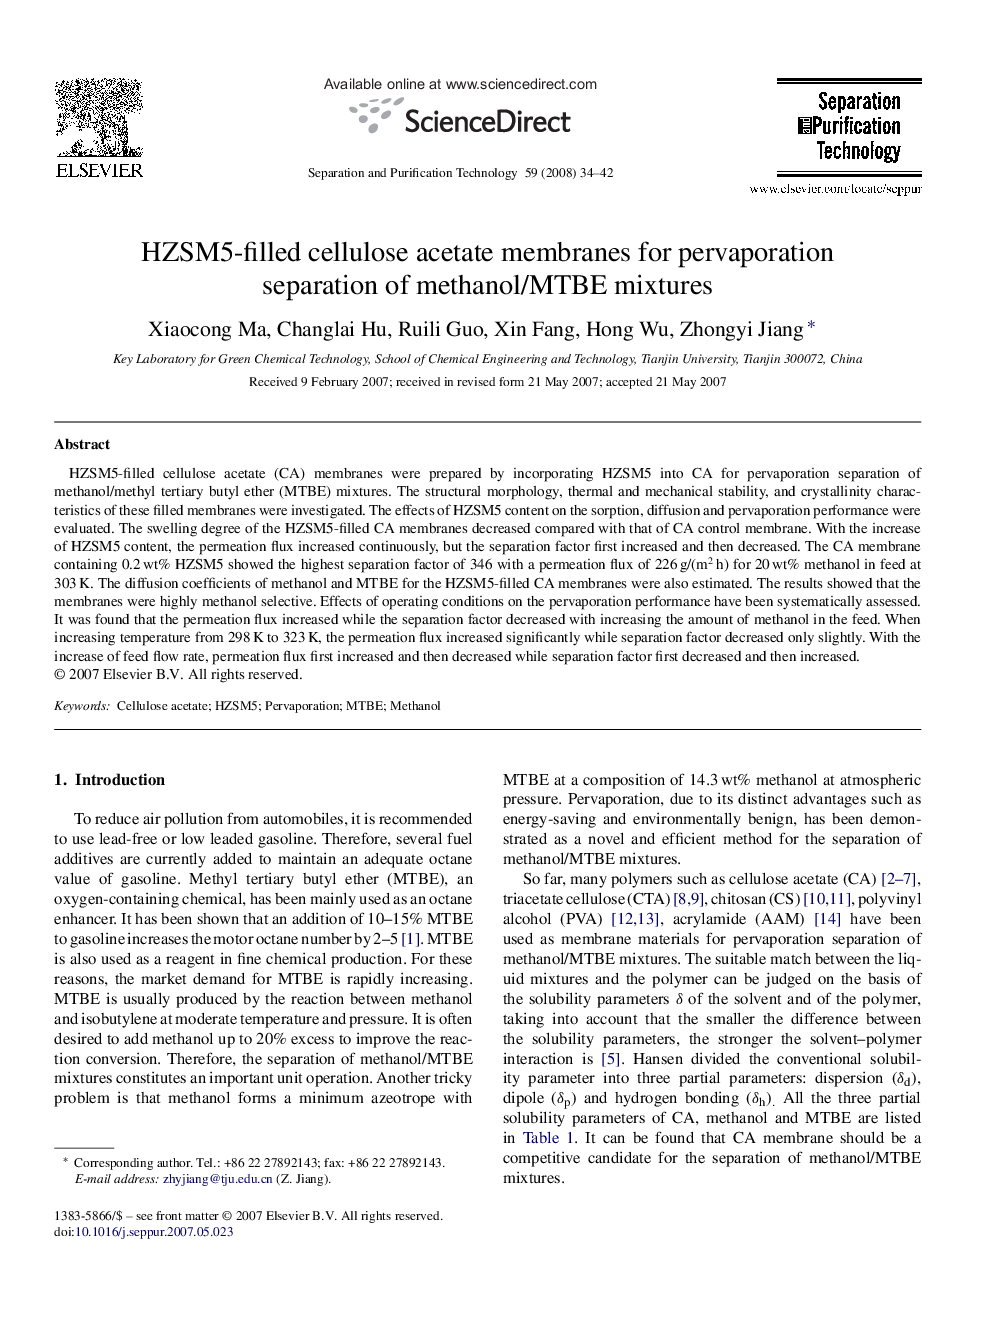 HZSM5-filled cellulose acetate membranes for pervaporation separation of methanol/MTBE mixtures